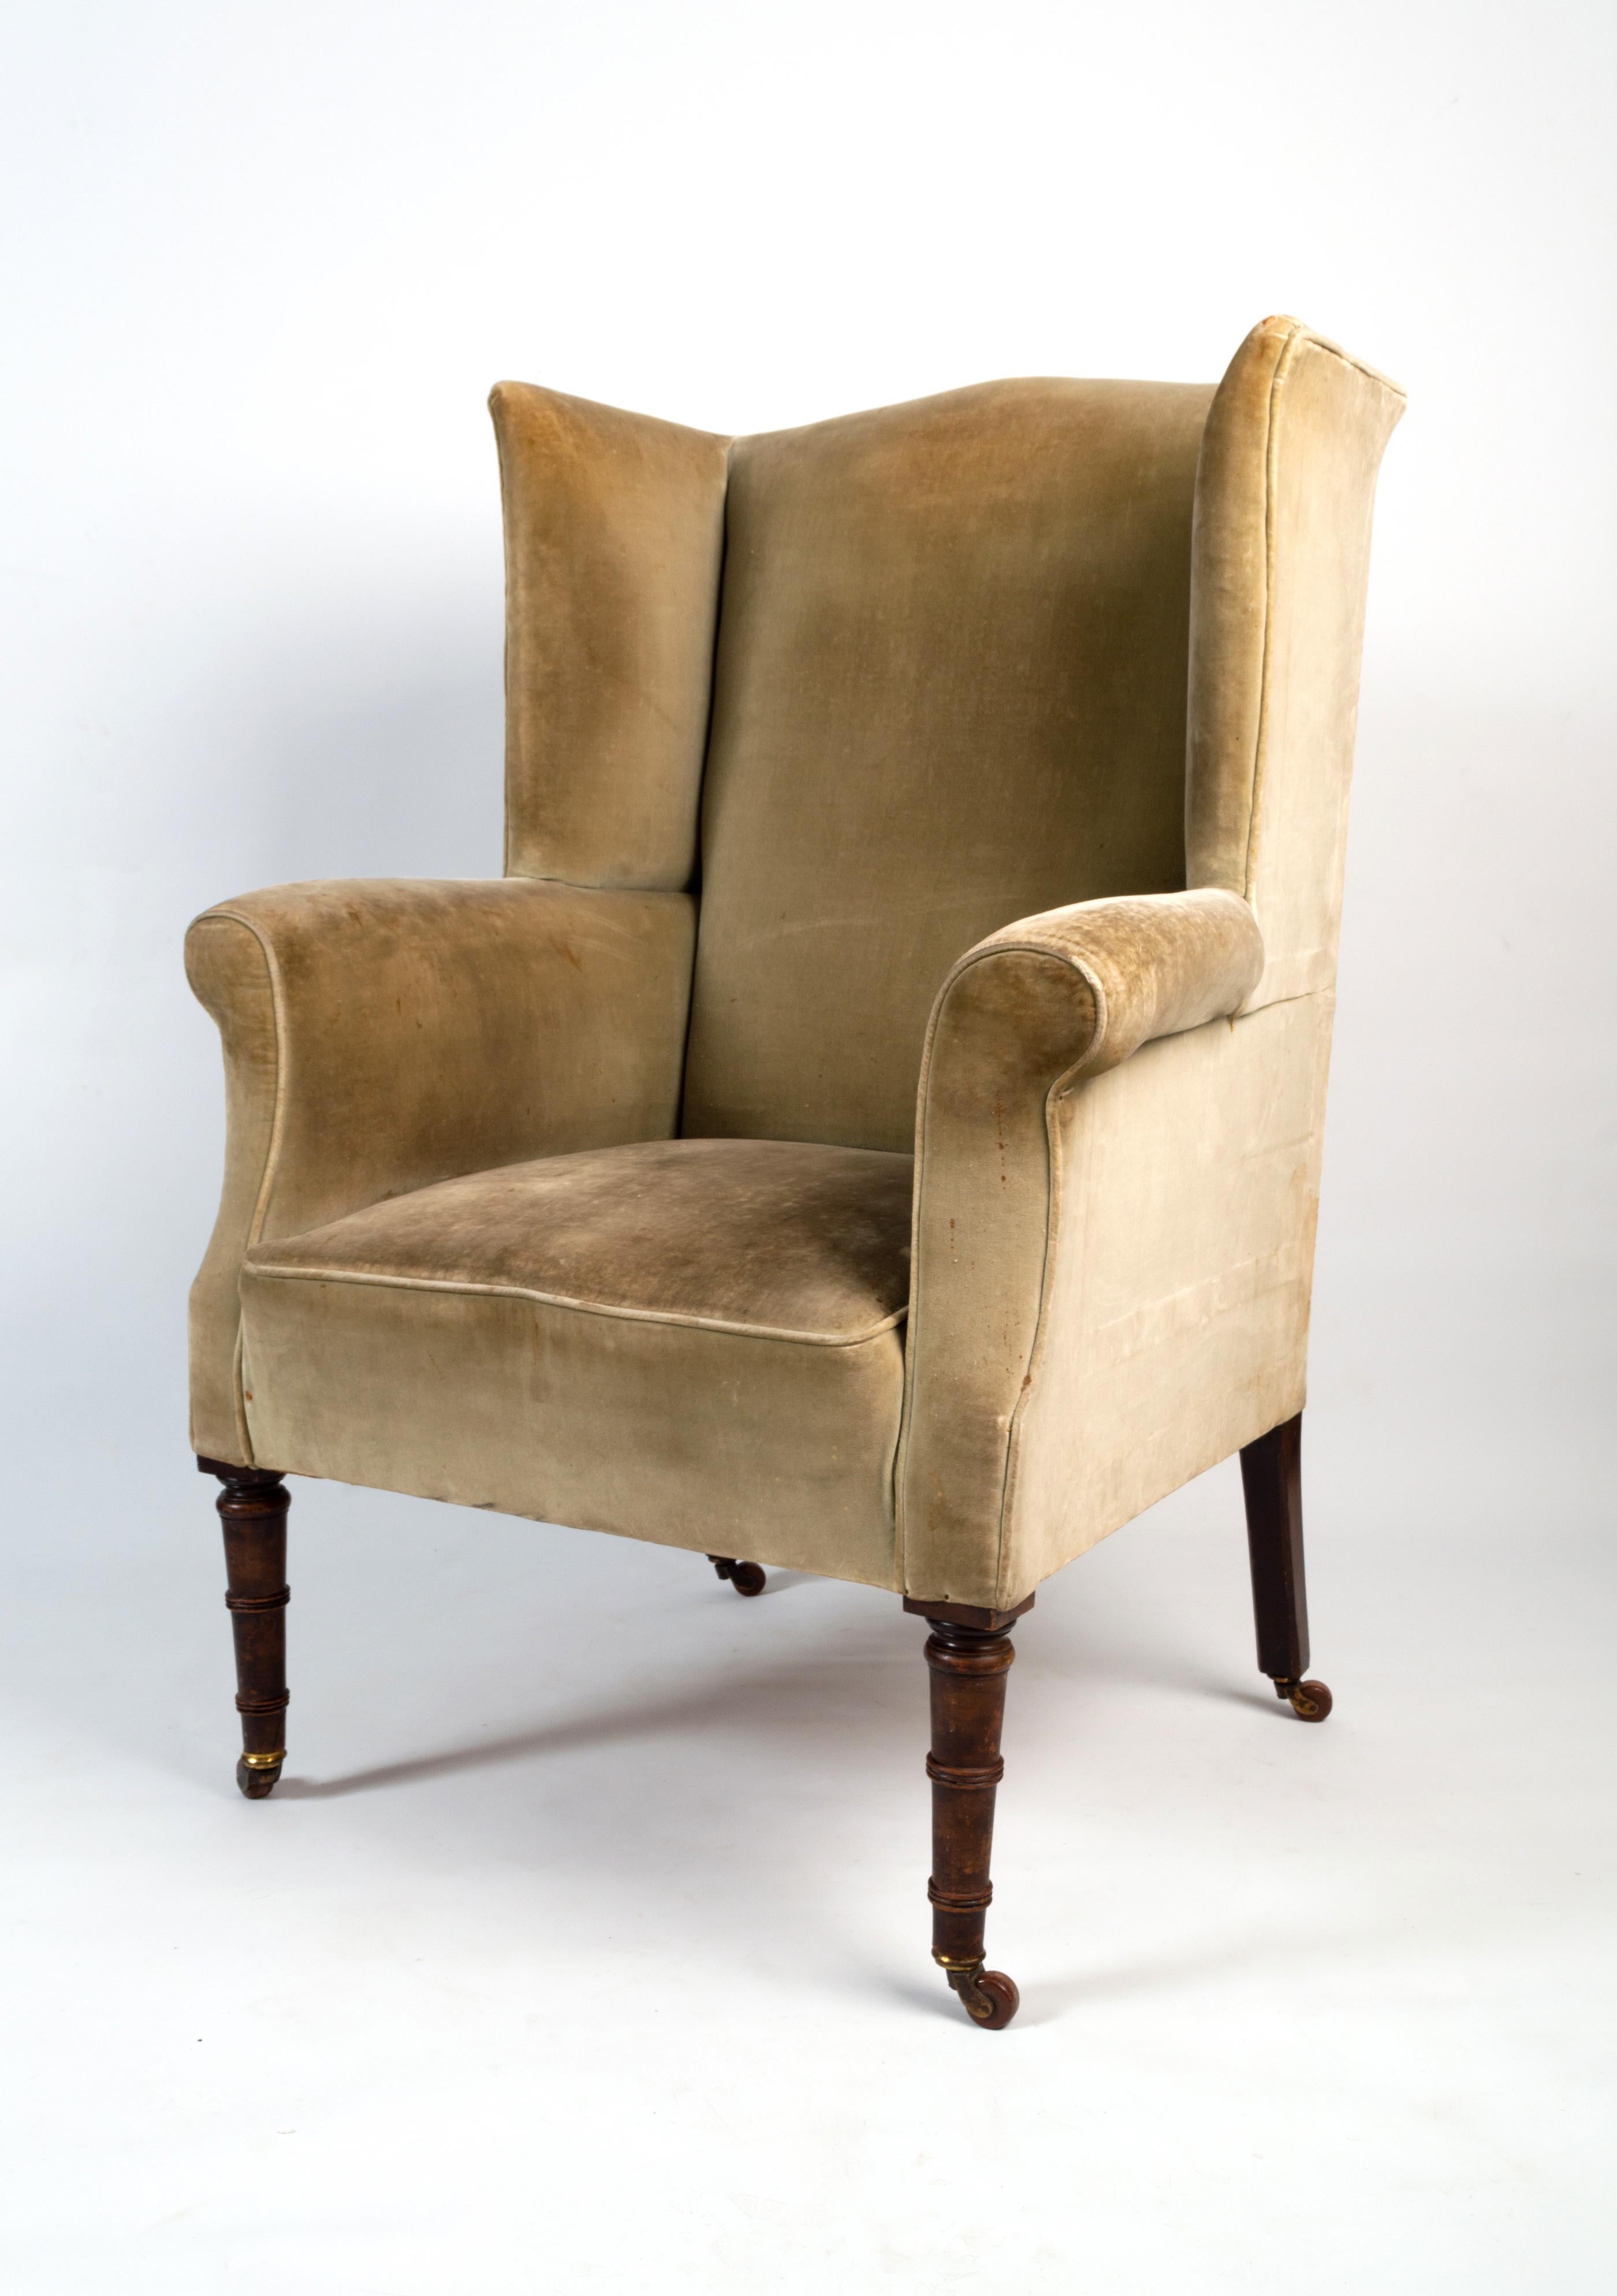 Antique English Regency Wing Armchair, circa 1820 In Good Condition For Sale In London, GB